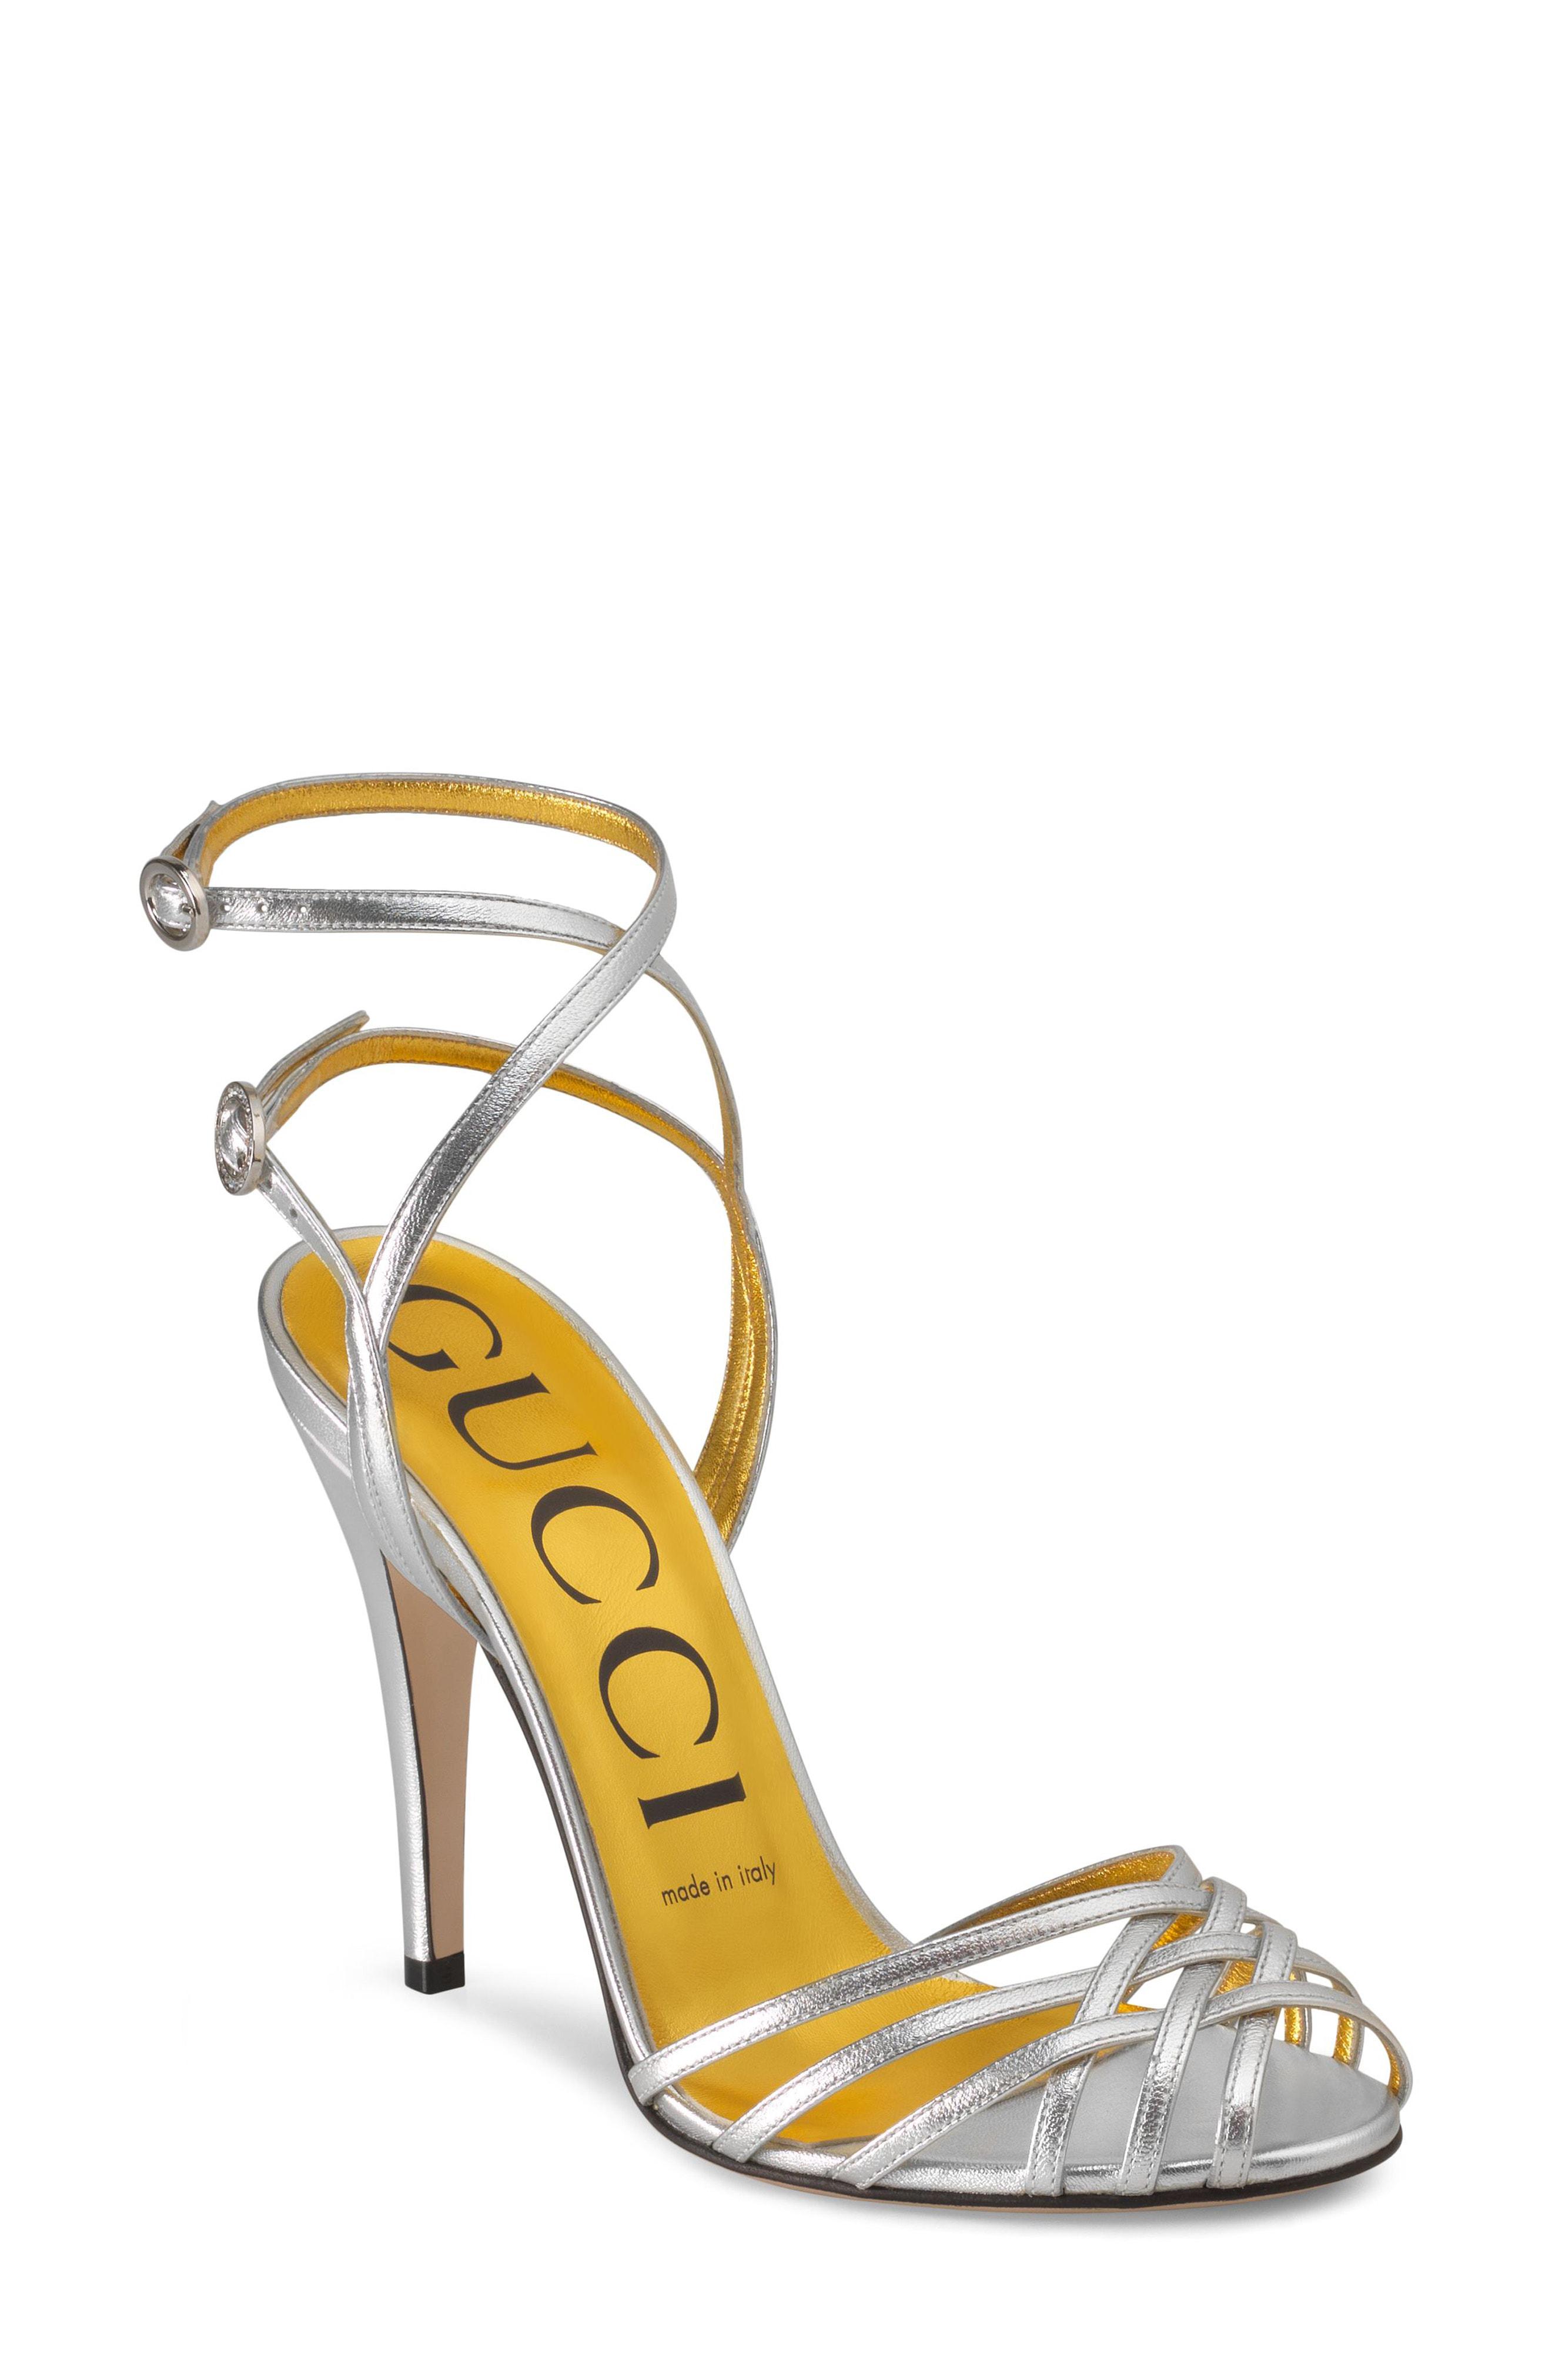 Gucci Draconia Ankle Strap Sandal in 